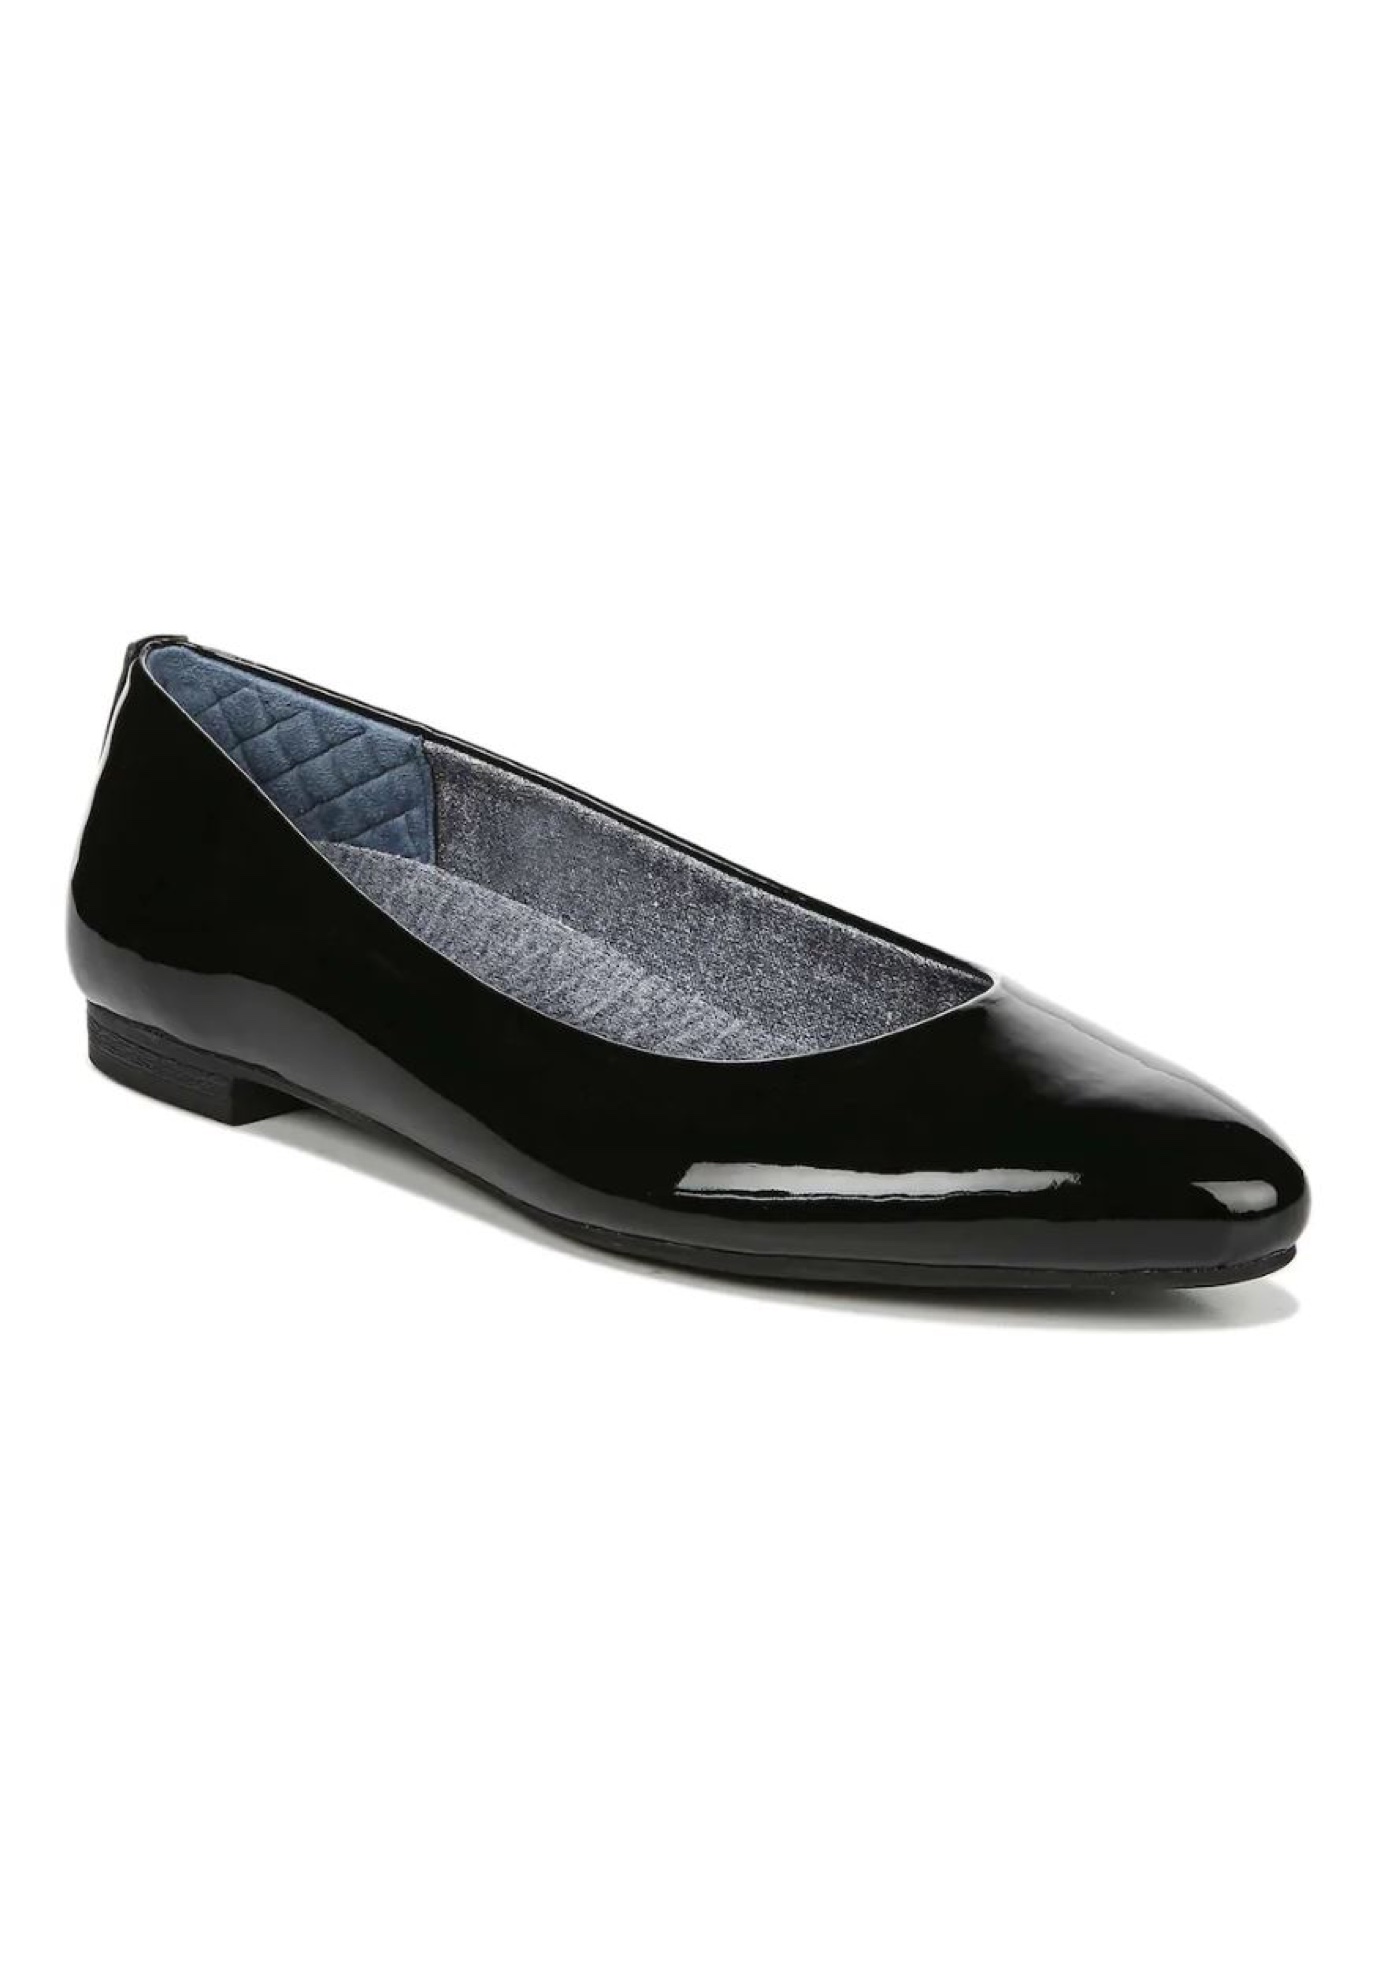 dr scholl's black patent leather flats